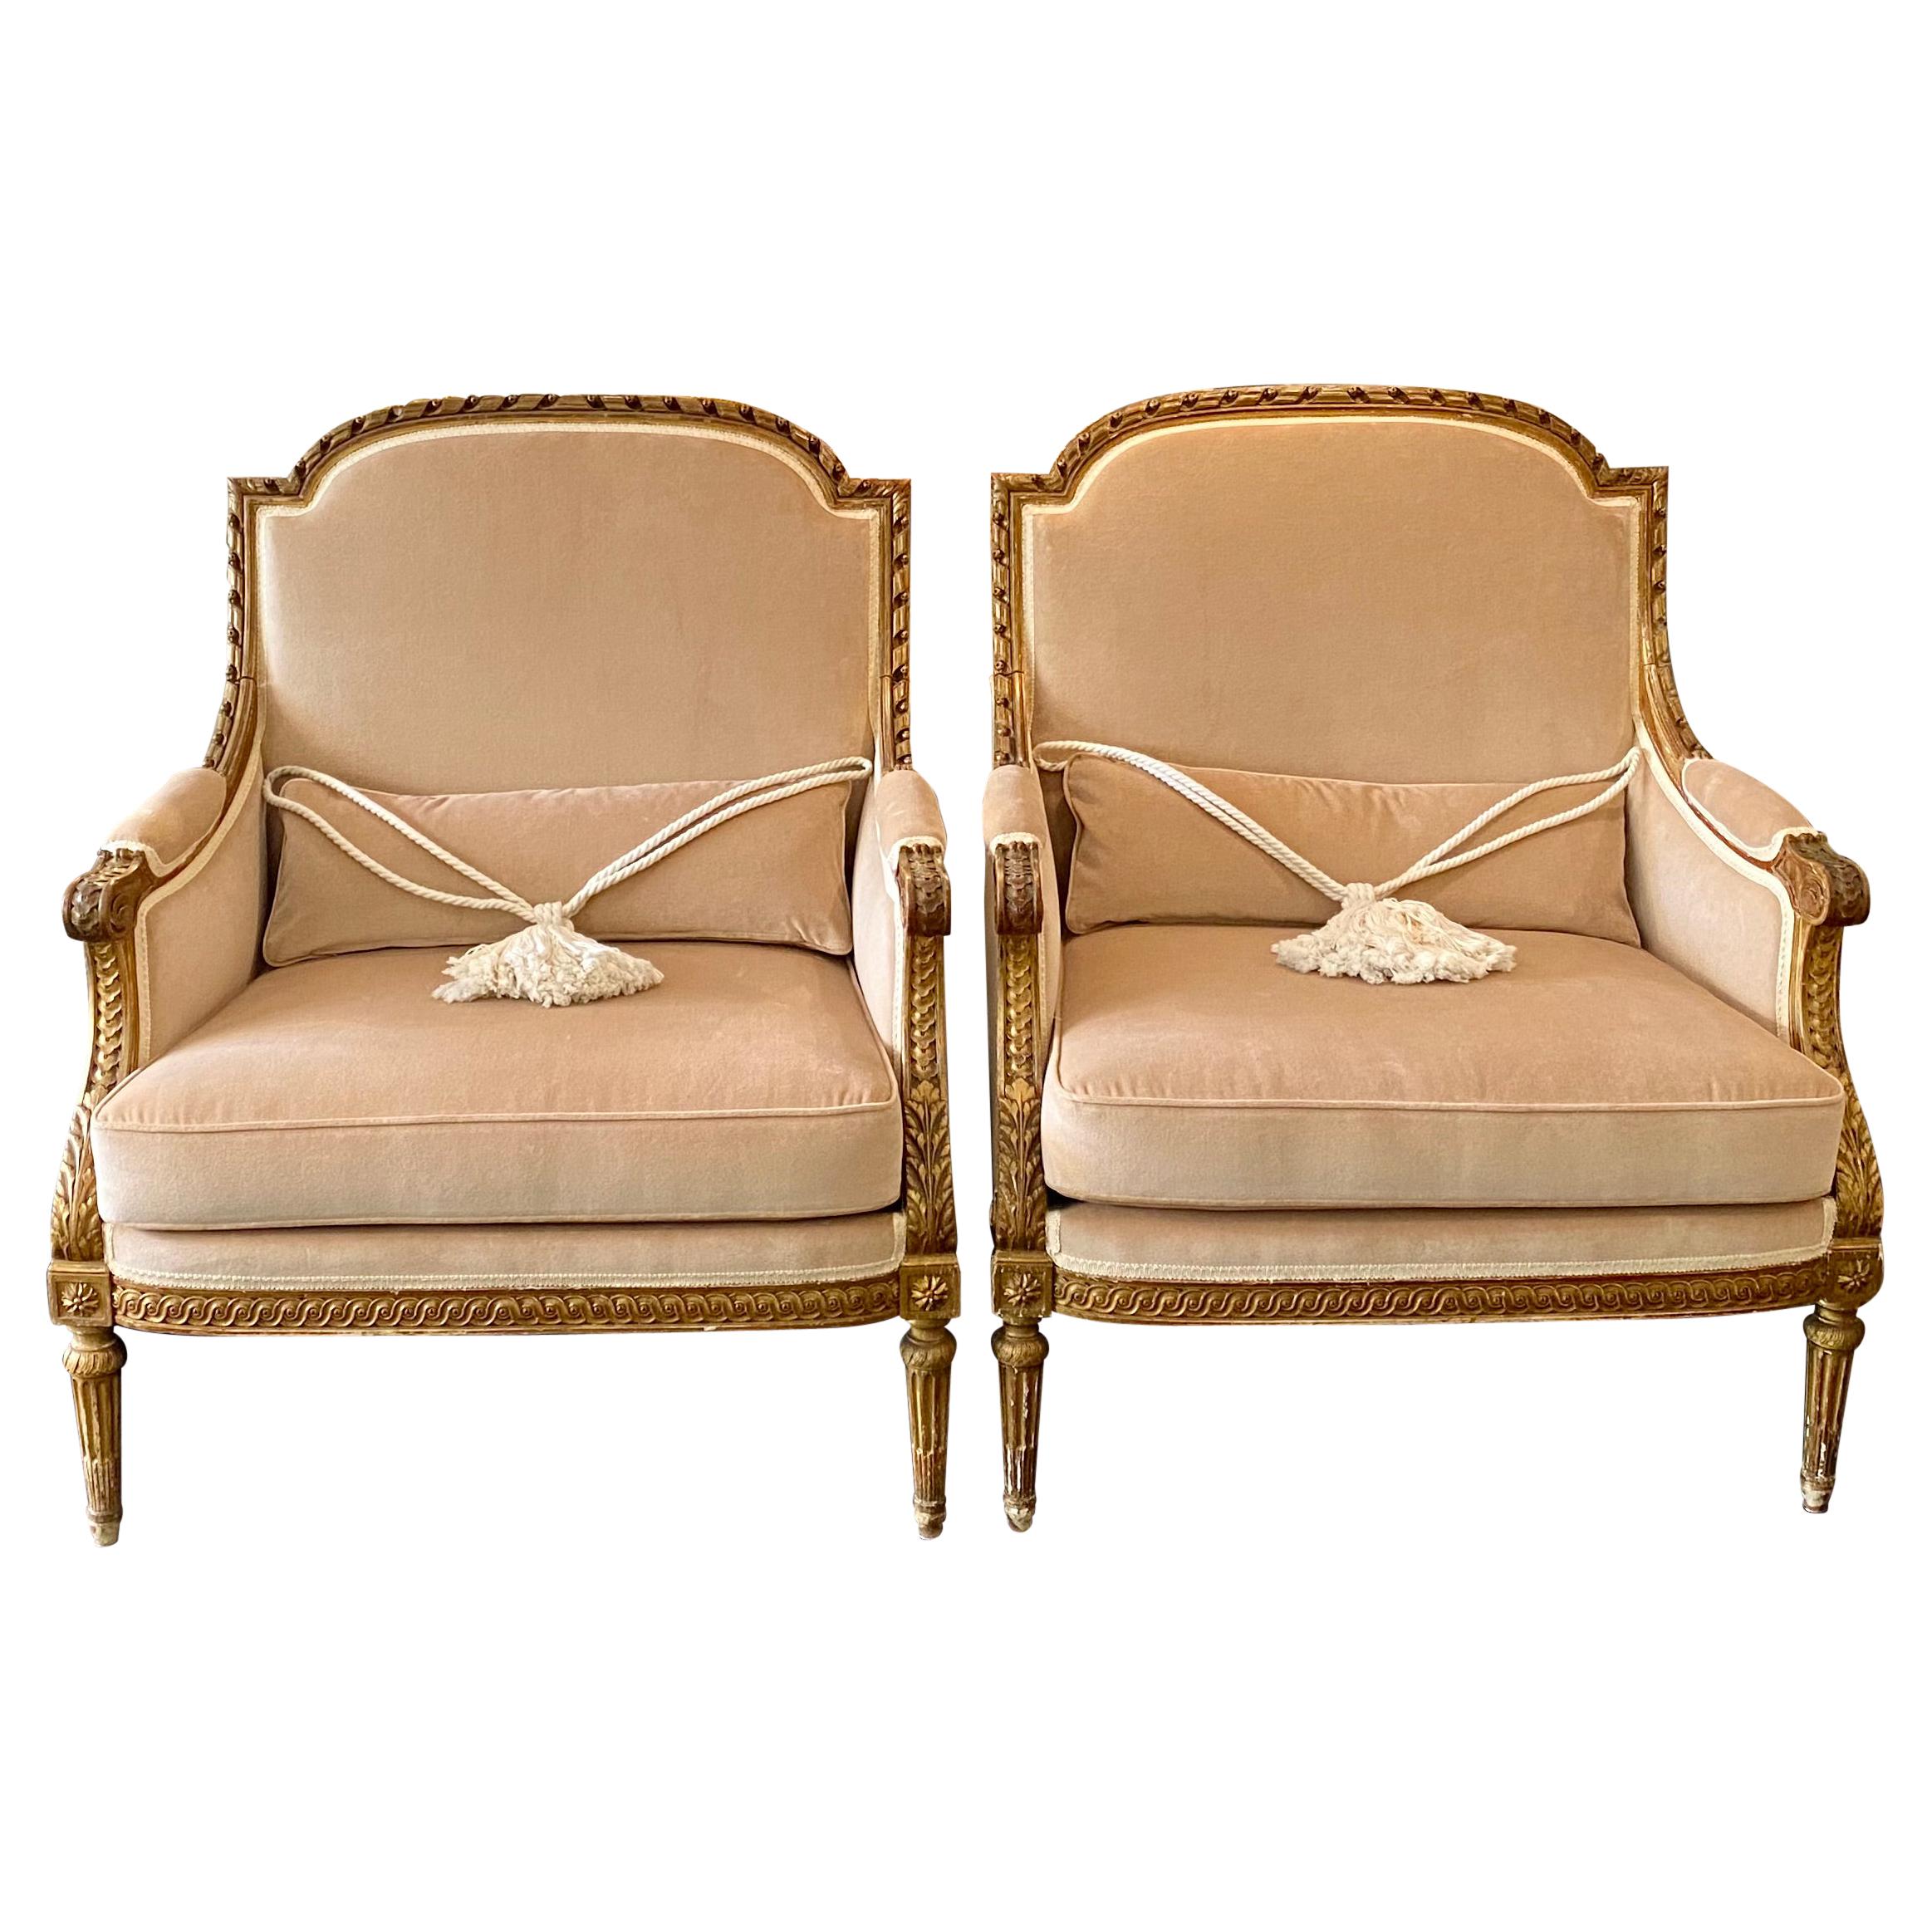 French Pair of Louis XVI Style Marquise Bergere Giltwood Armchairs